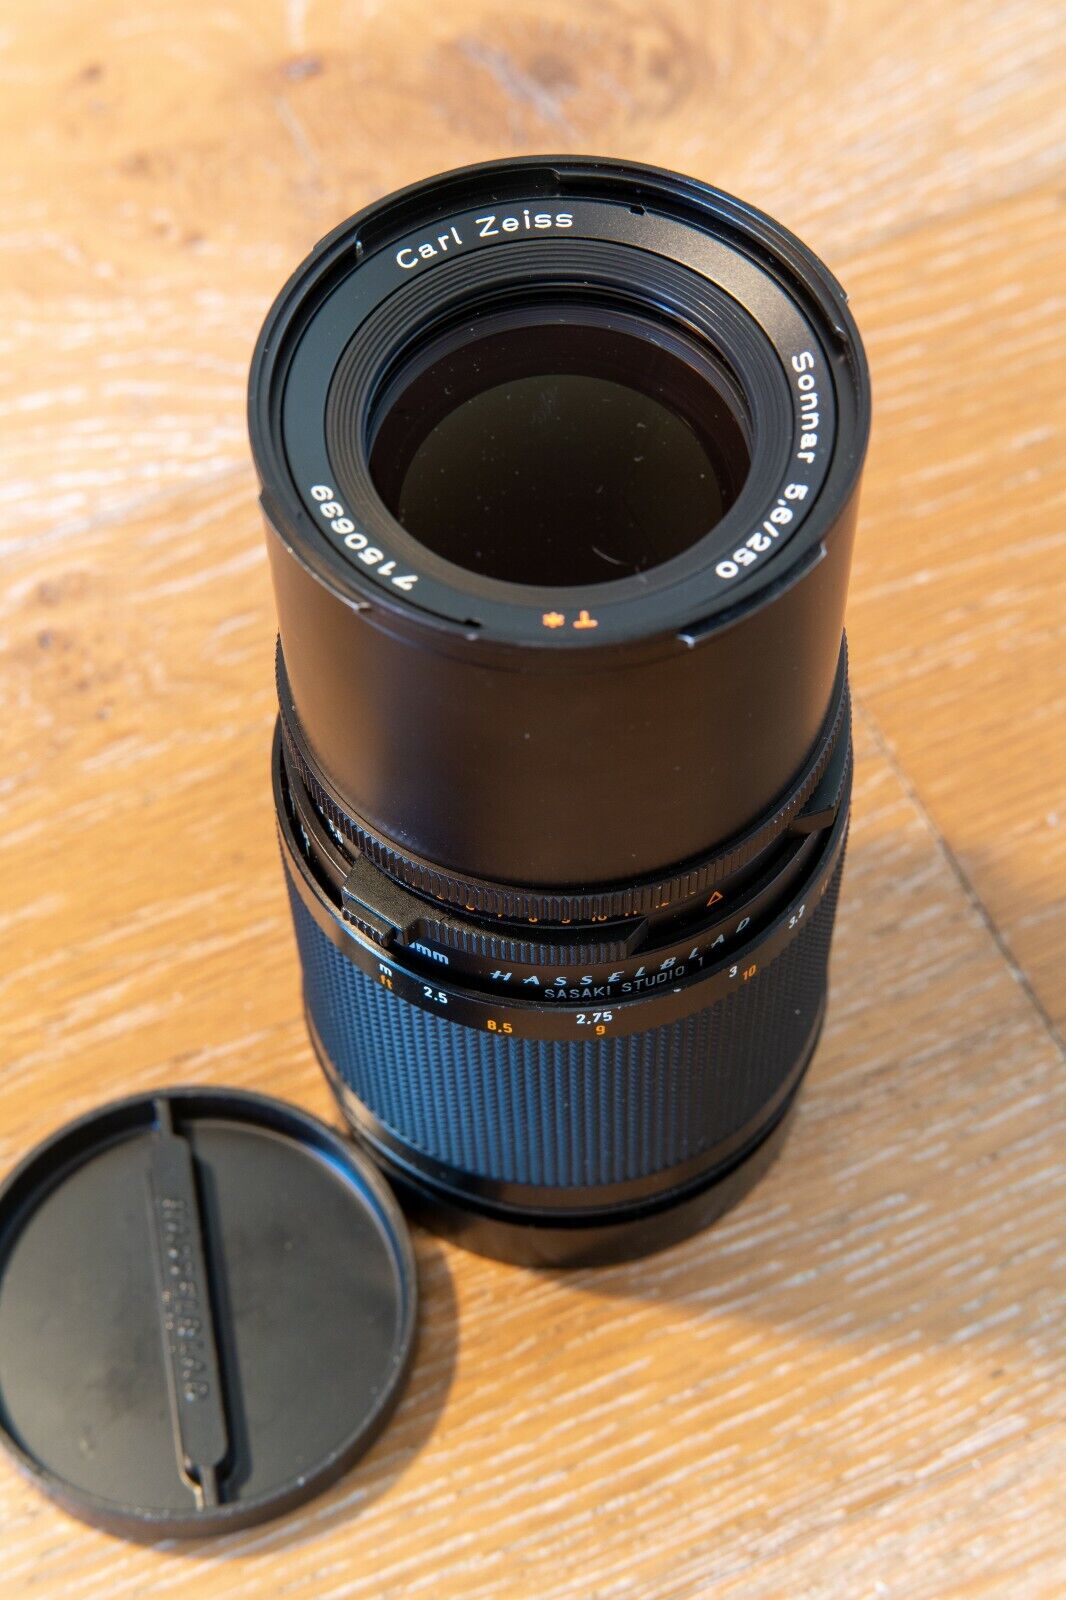 Zeiss Sonnar 250mm f/5.6 CF Lens for Hasselblad for sale online | eBay